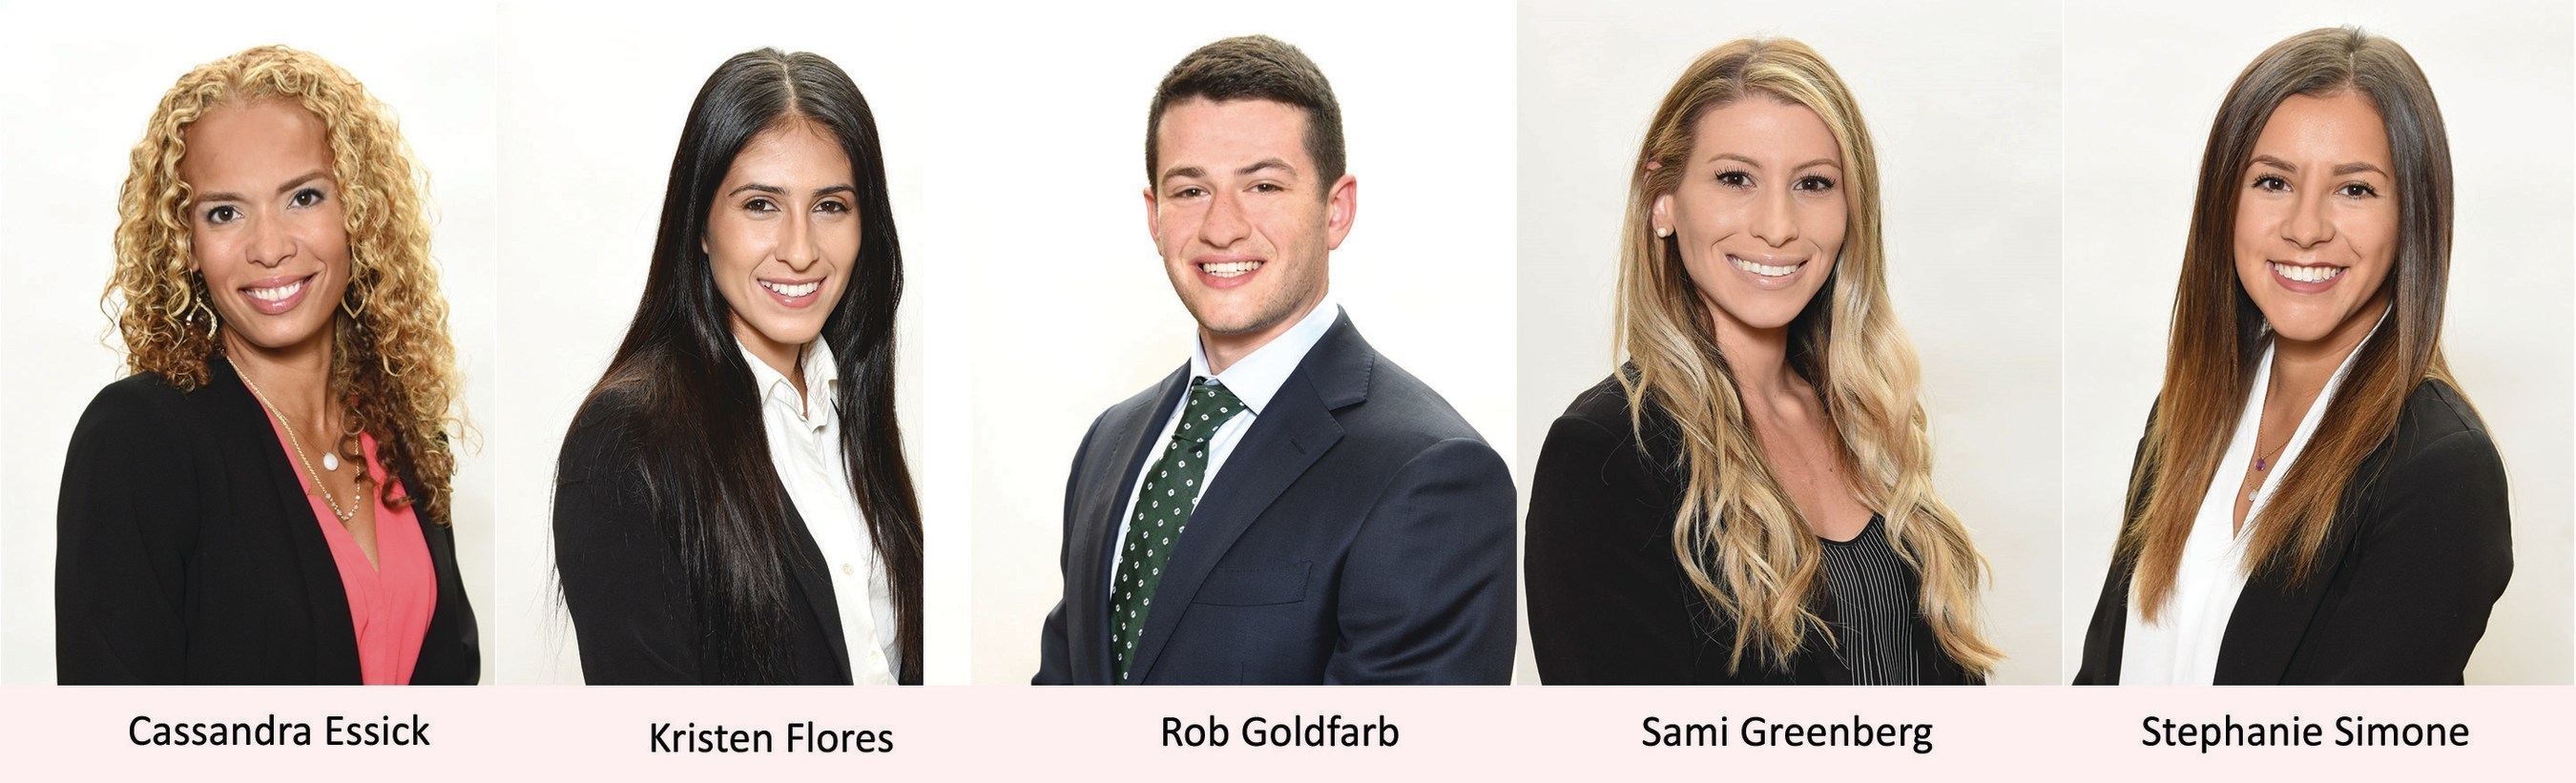 The Siegfried Group welcomes new professionals to its Leadership team